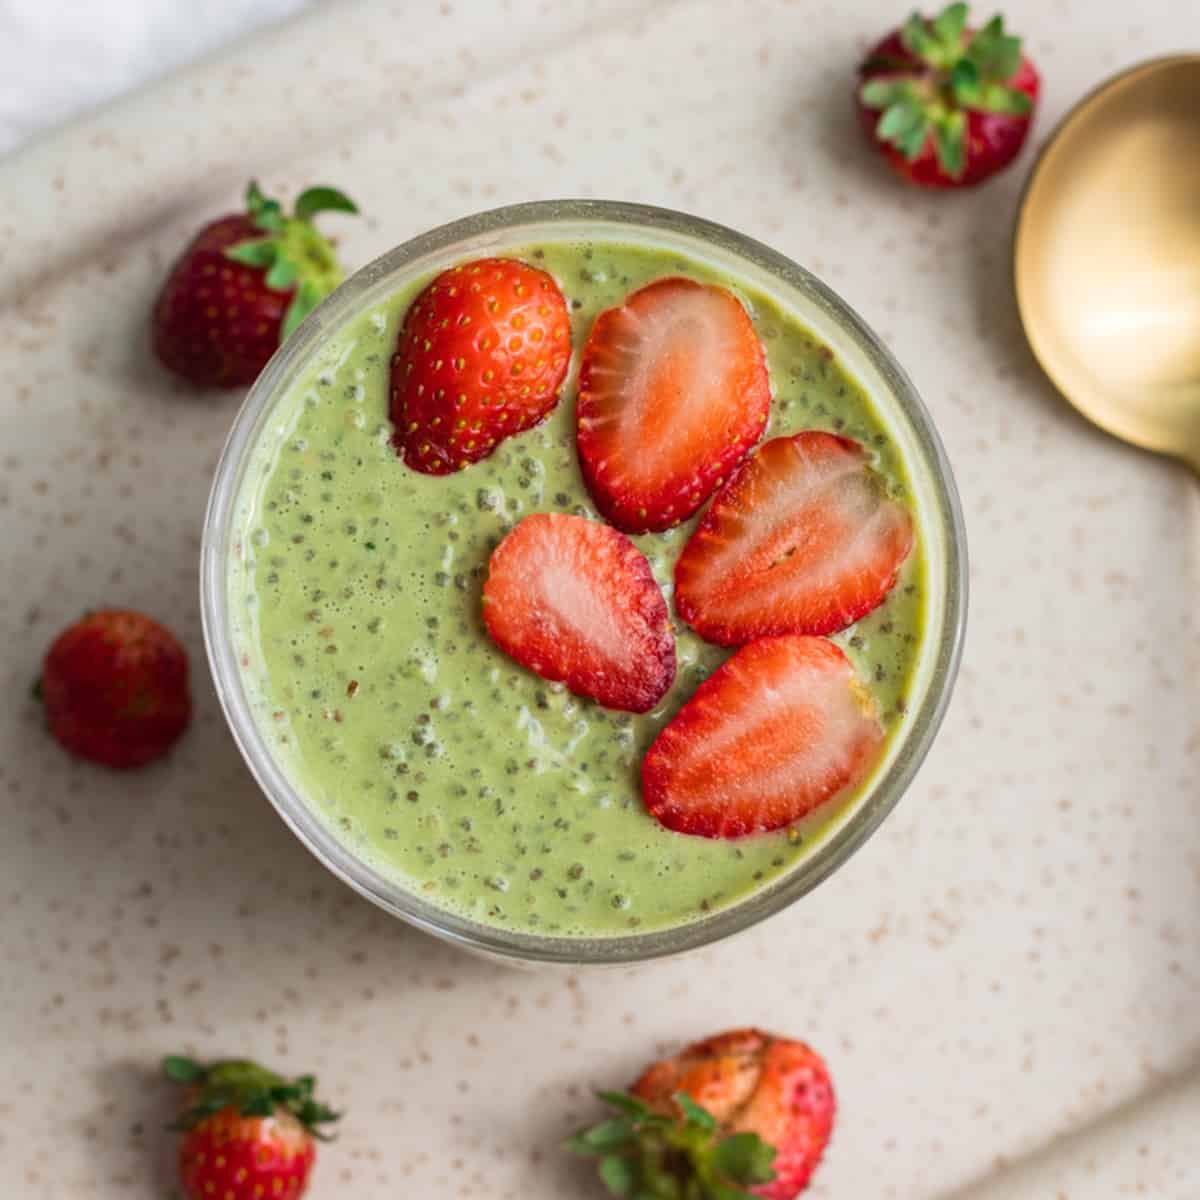 A high protein green smoothie with strawberries and chia seeds, perfect for a nutritious breakfast.